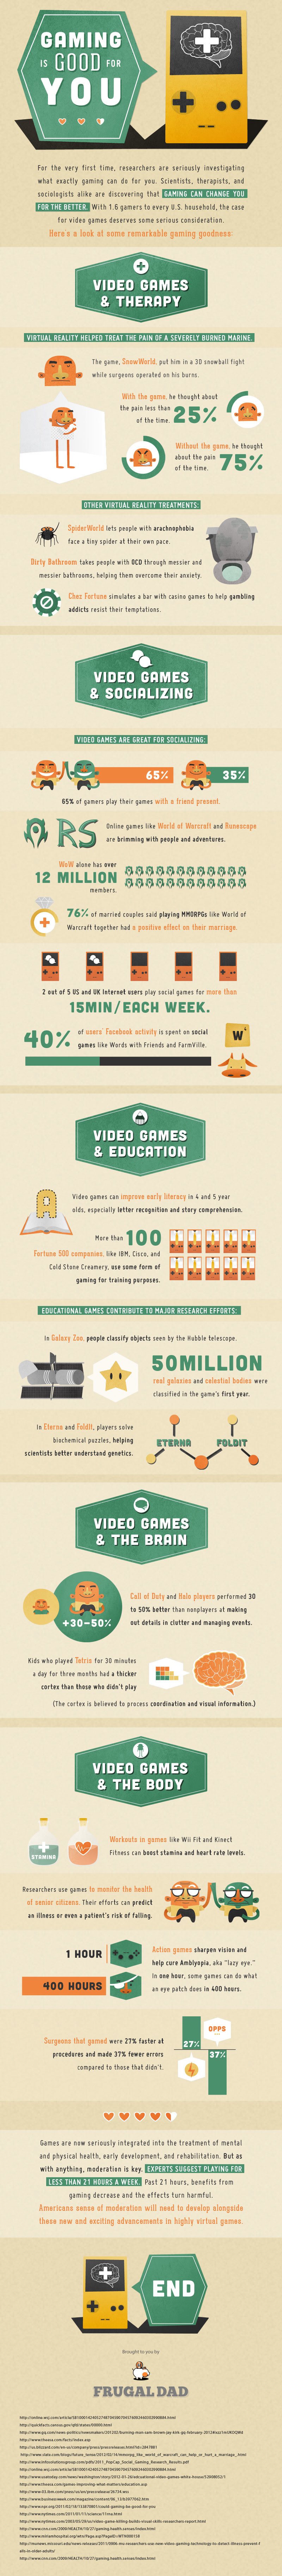 The-Benefits-of-Gaming-Infographic